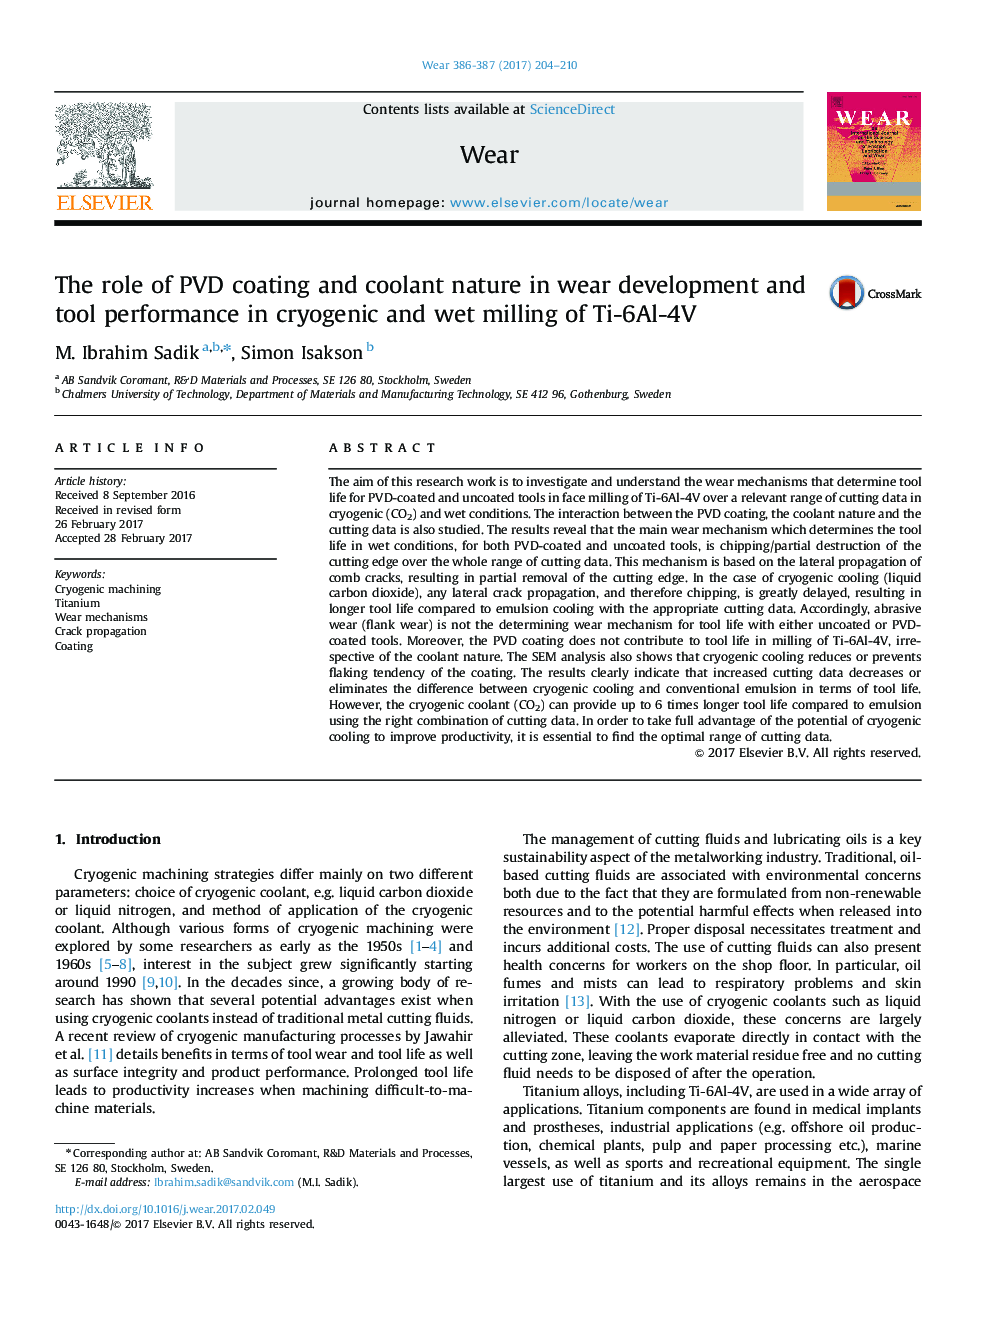 The role of PVD coating and coolant nature in wear development and tool performance in cryogenic and wet milling of Ti-6Al-4V